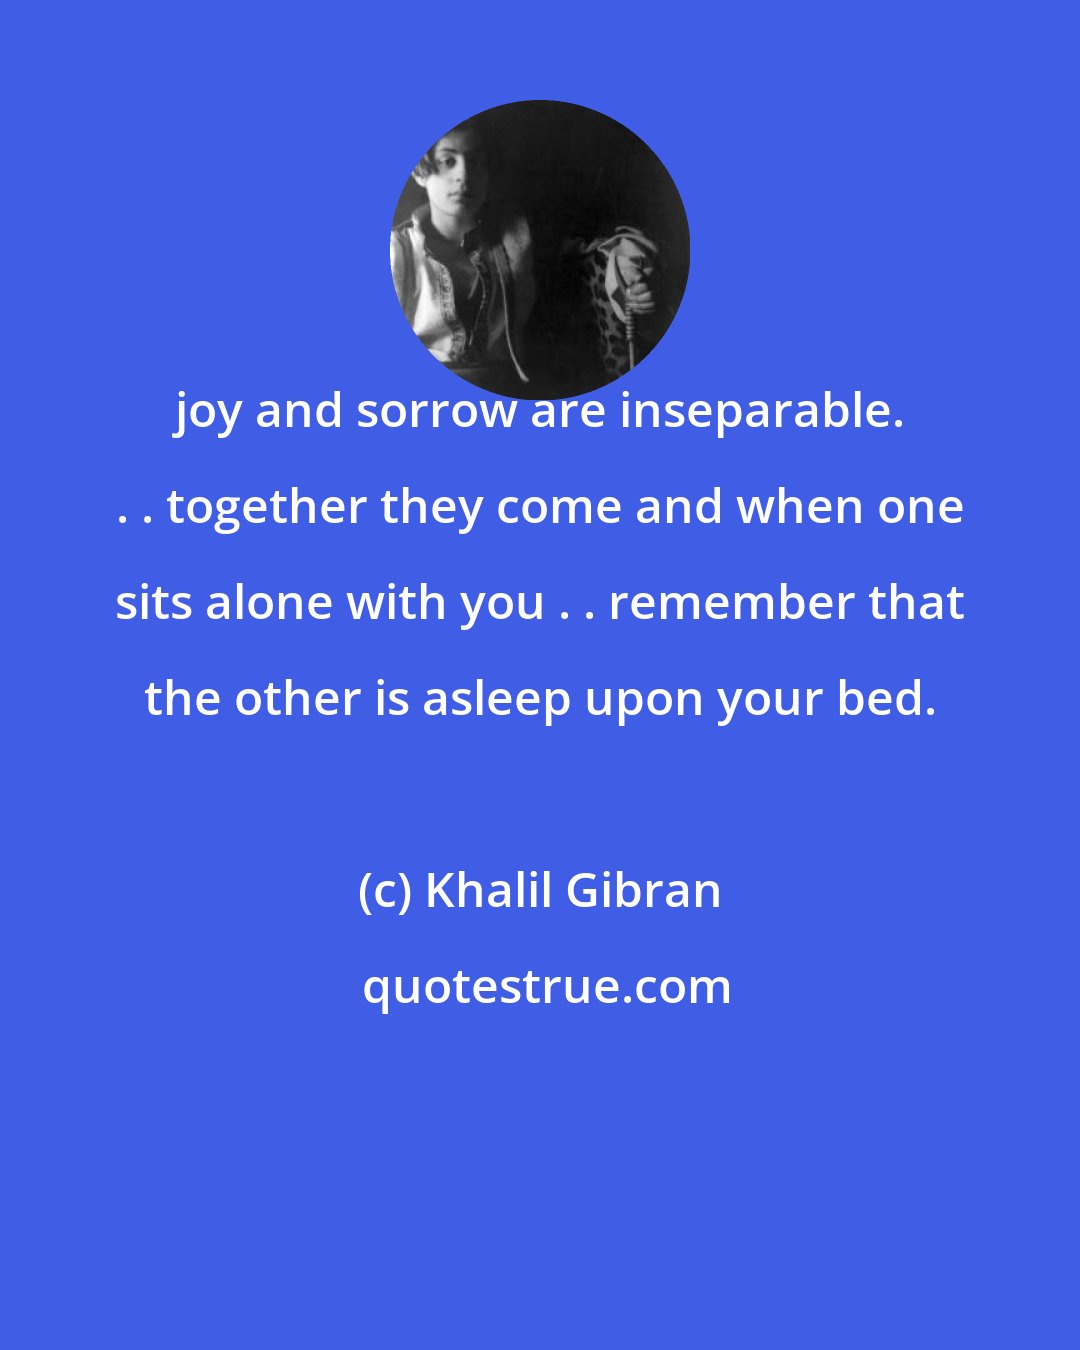 Khalil Gibran: joy and sorrow are inseparable. . . together they come and when one sits alone with you . . remember that the other is asleep upon your bed.